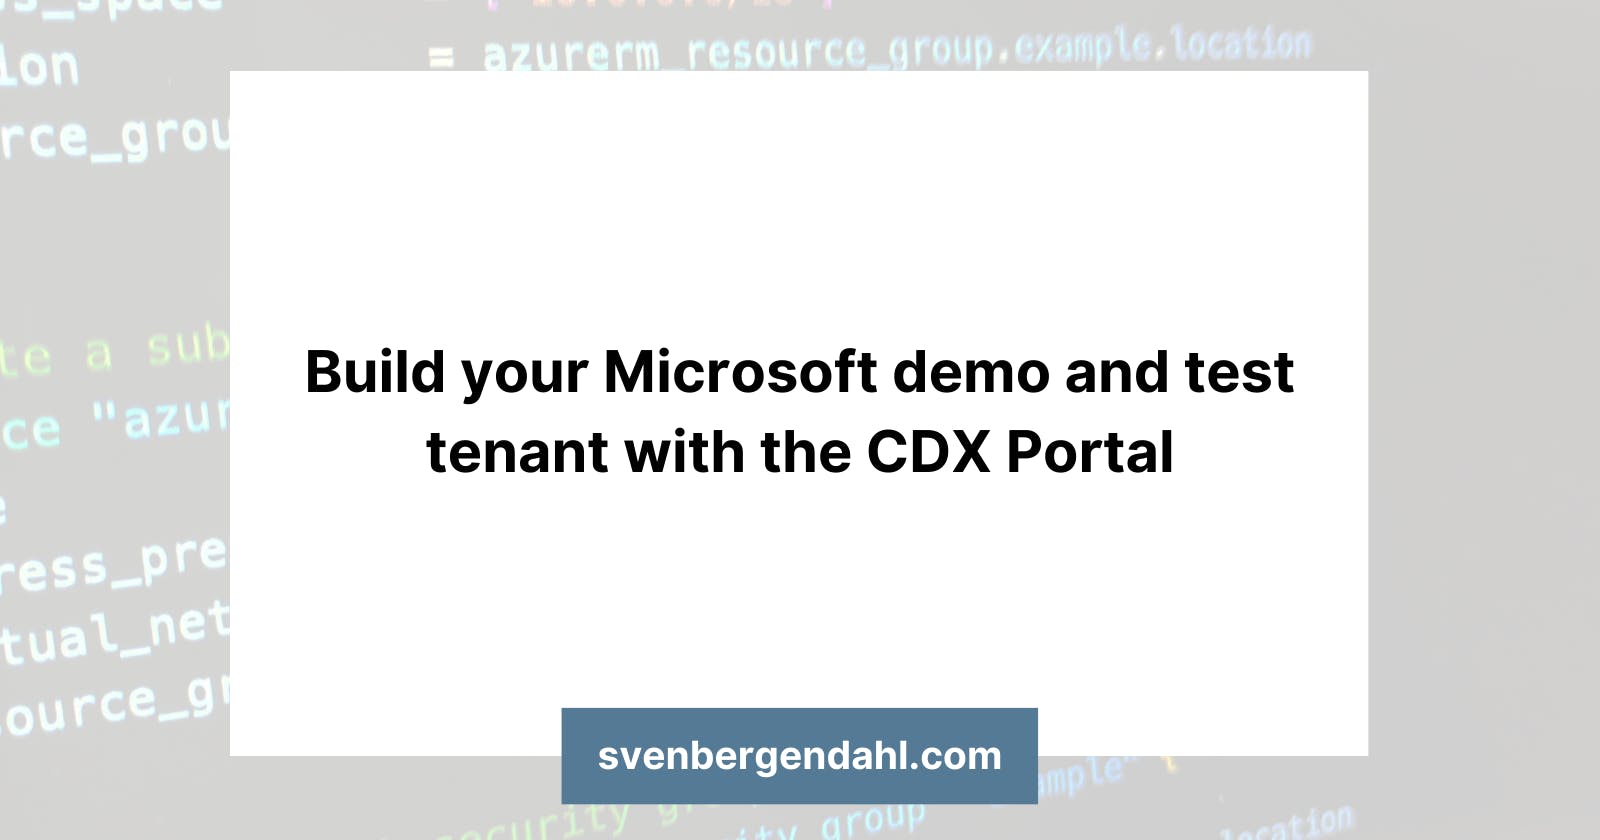 Build your Microsoft demo and test tenant with the CDX Portal